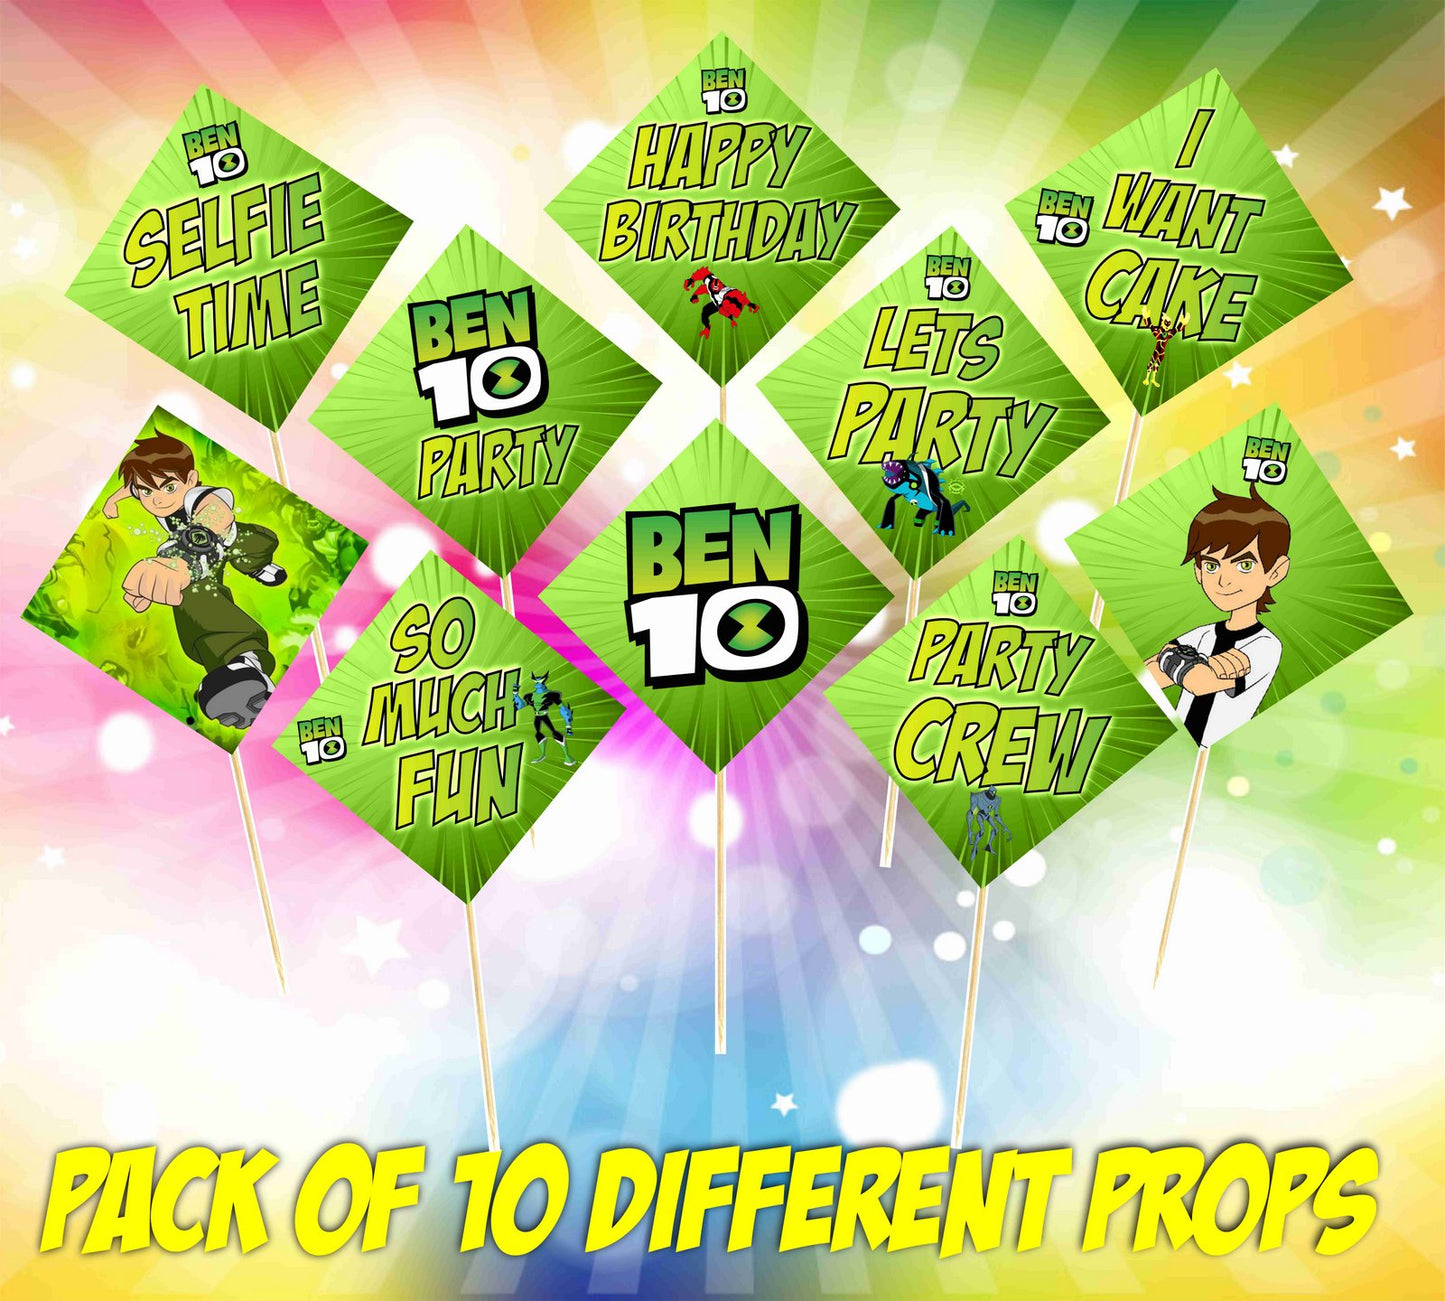 Ben10 Birthday Photo Booth Party Props Theme Birthday Party Decoration, Birthday Photo Booth Party Item for Adults and Kids